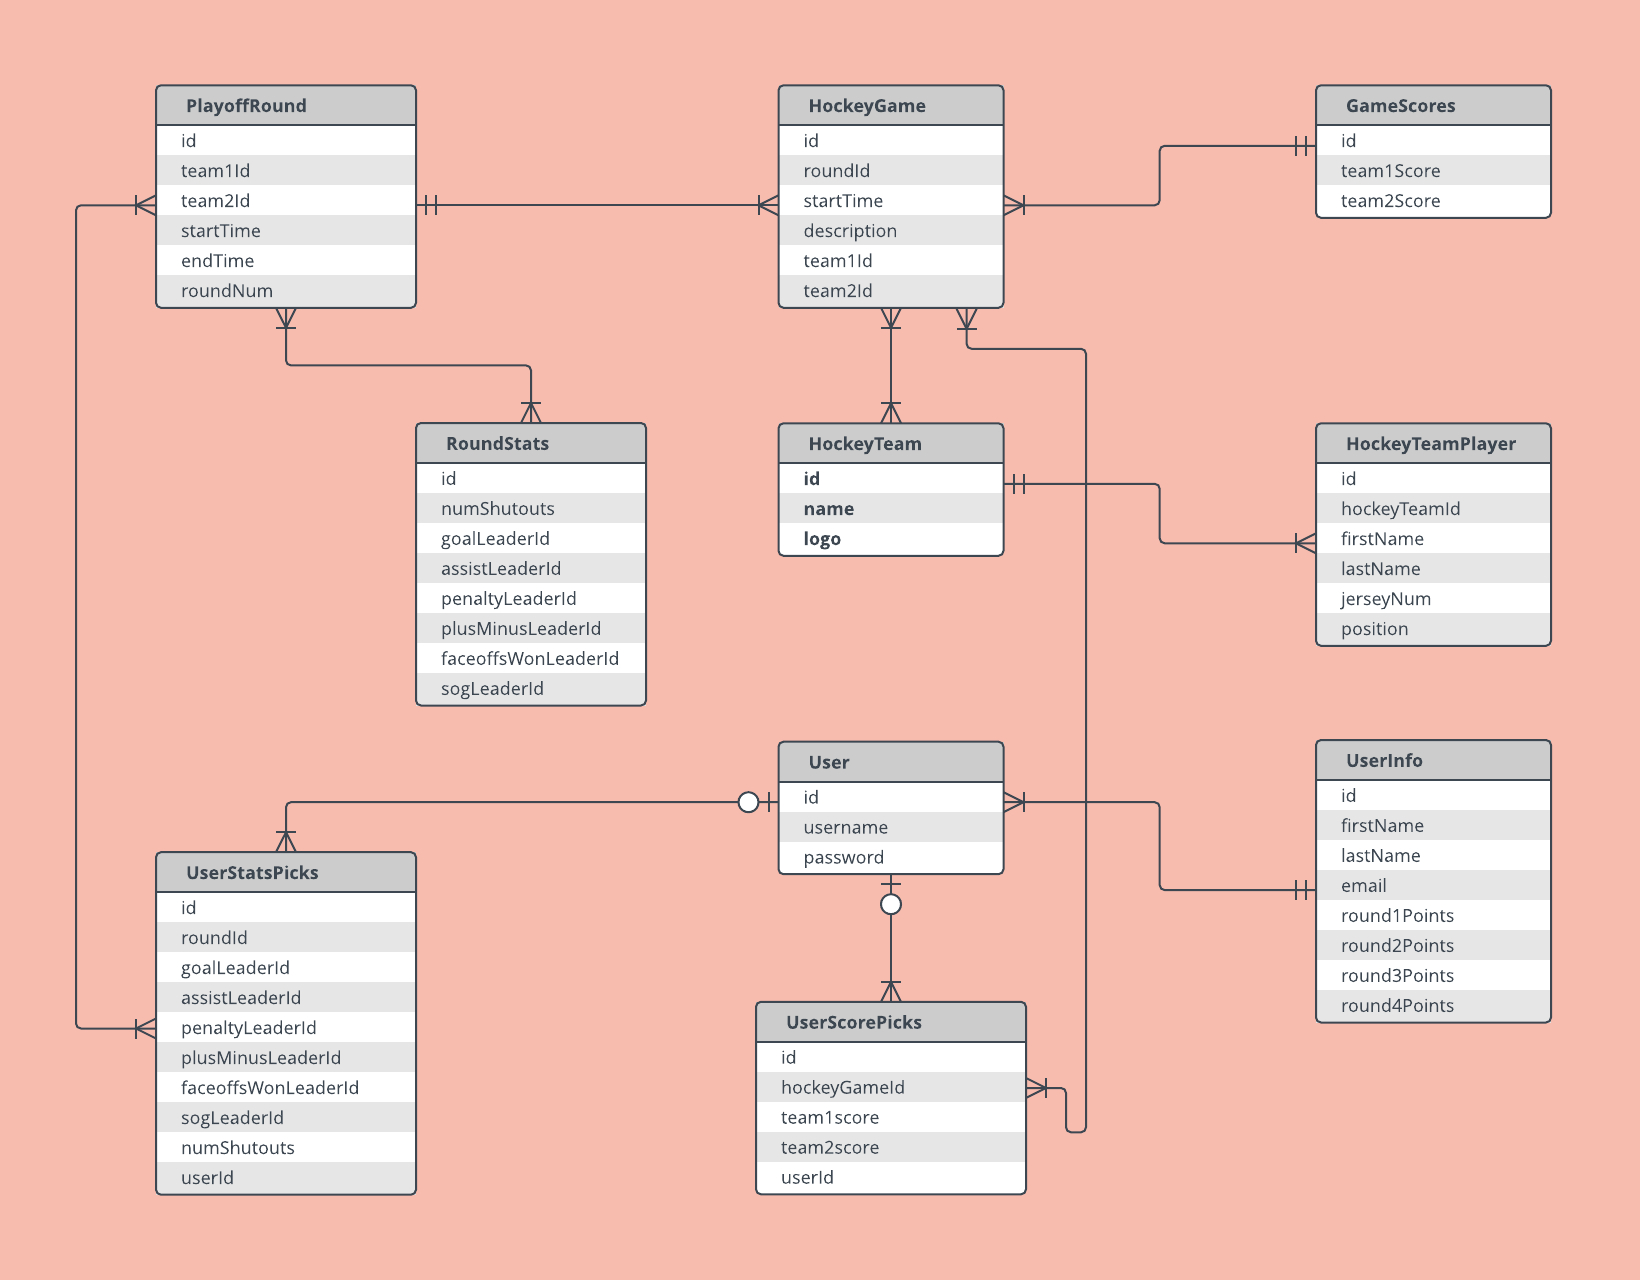 Er Diagram Examples And Templates | Lucidchart intended for Er Diagram Examples